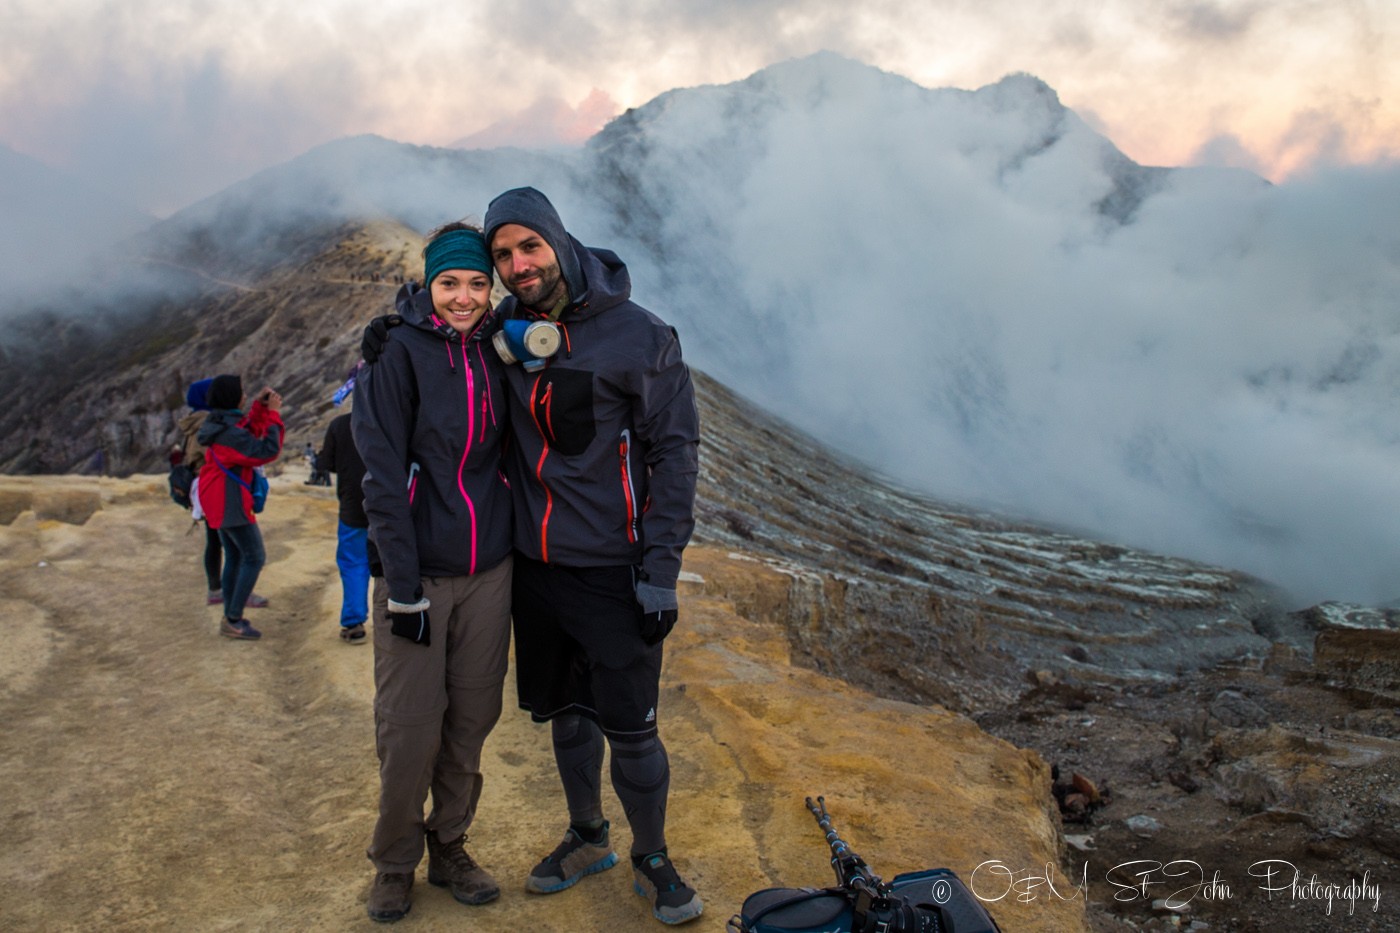 Max and Oksana at the top of Ijen Crater. Java. Indonesia